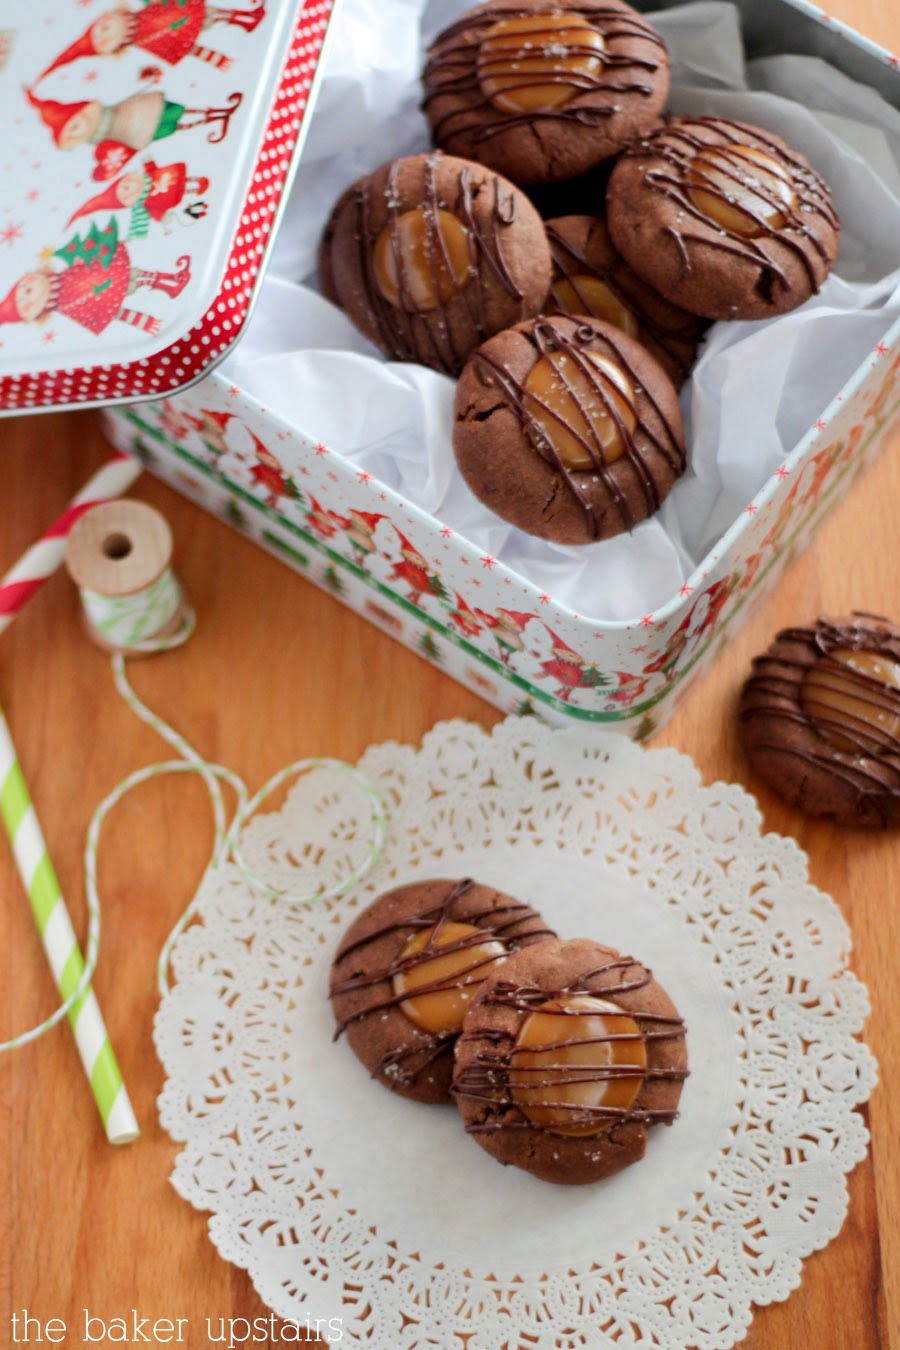 These salted caramel chocolate thumbprint cookies have a rich and buttery chocolate cookie base, a luscious caramel center, and are topped with drizzled chocolate and sea salt. They're unforgettable!